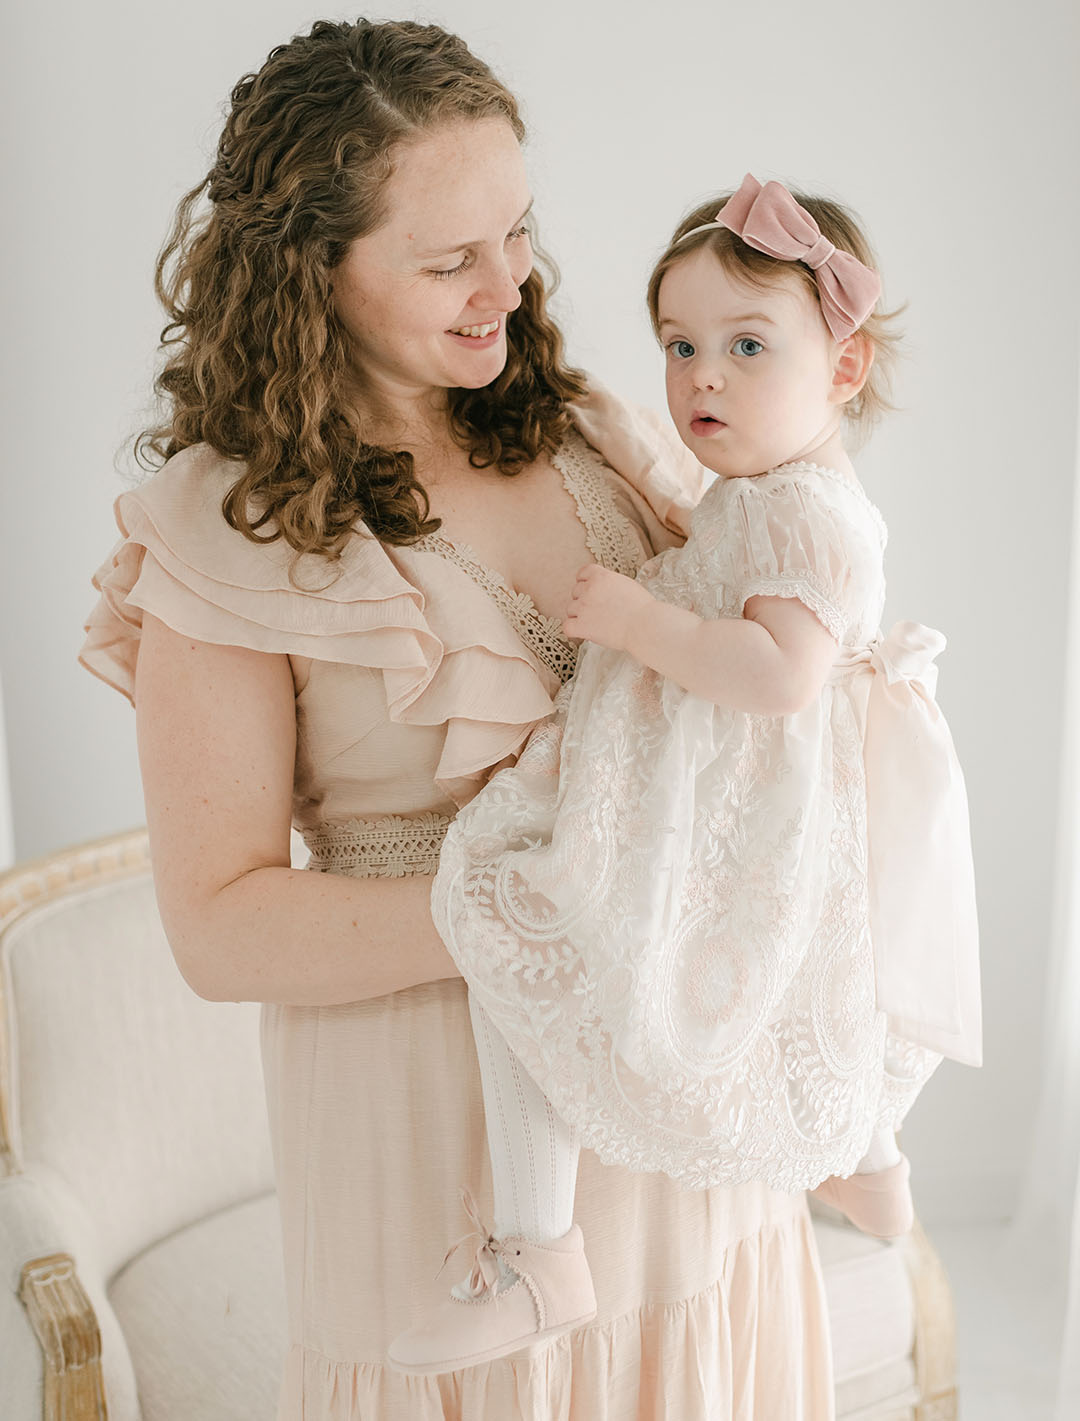 A mother with curly hair smiling at her young daughter, who she holds in her arms, both dressed in soft pastel pink Elizabeth Christening Dresses, in a bright, elegant room.